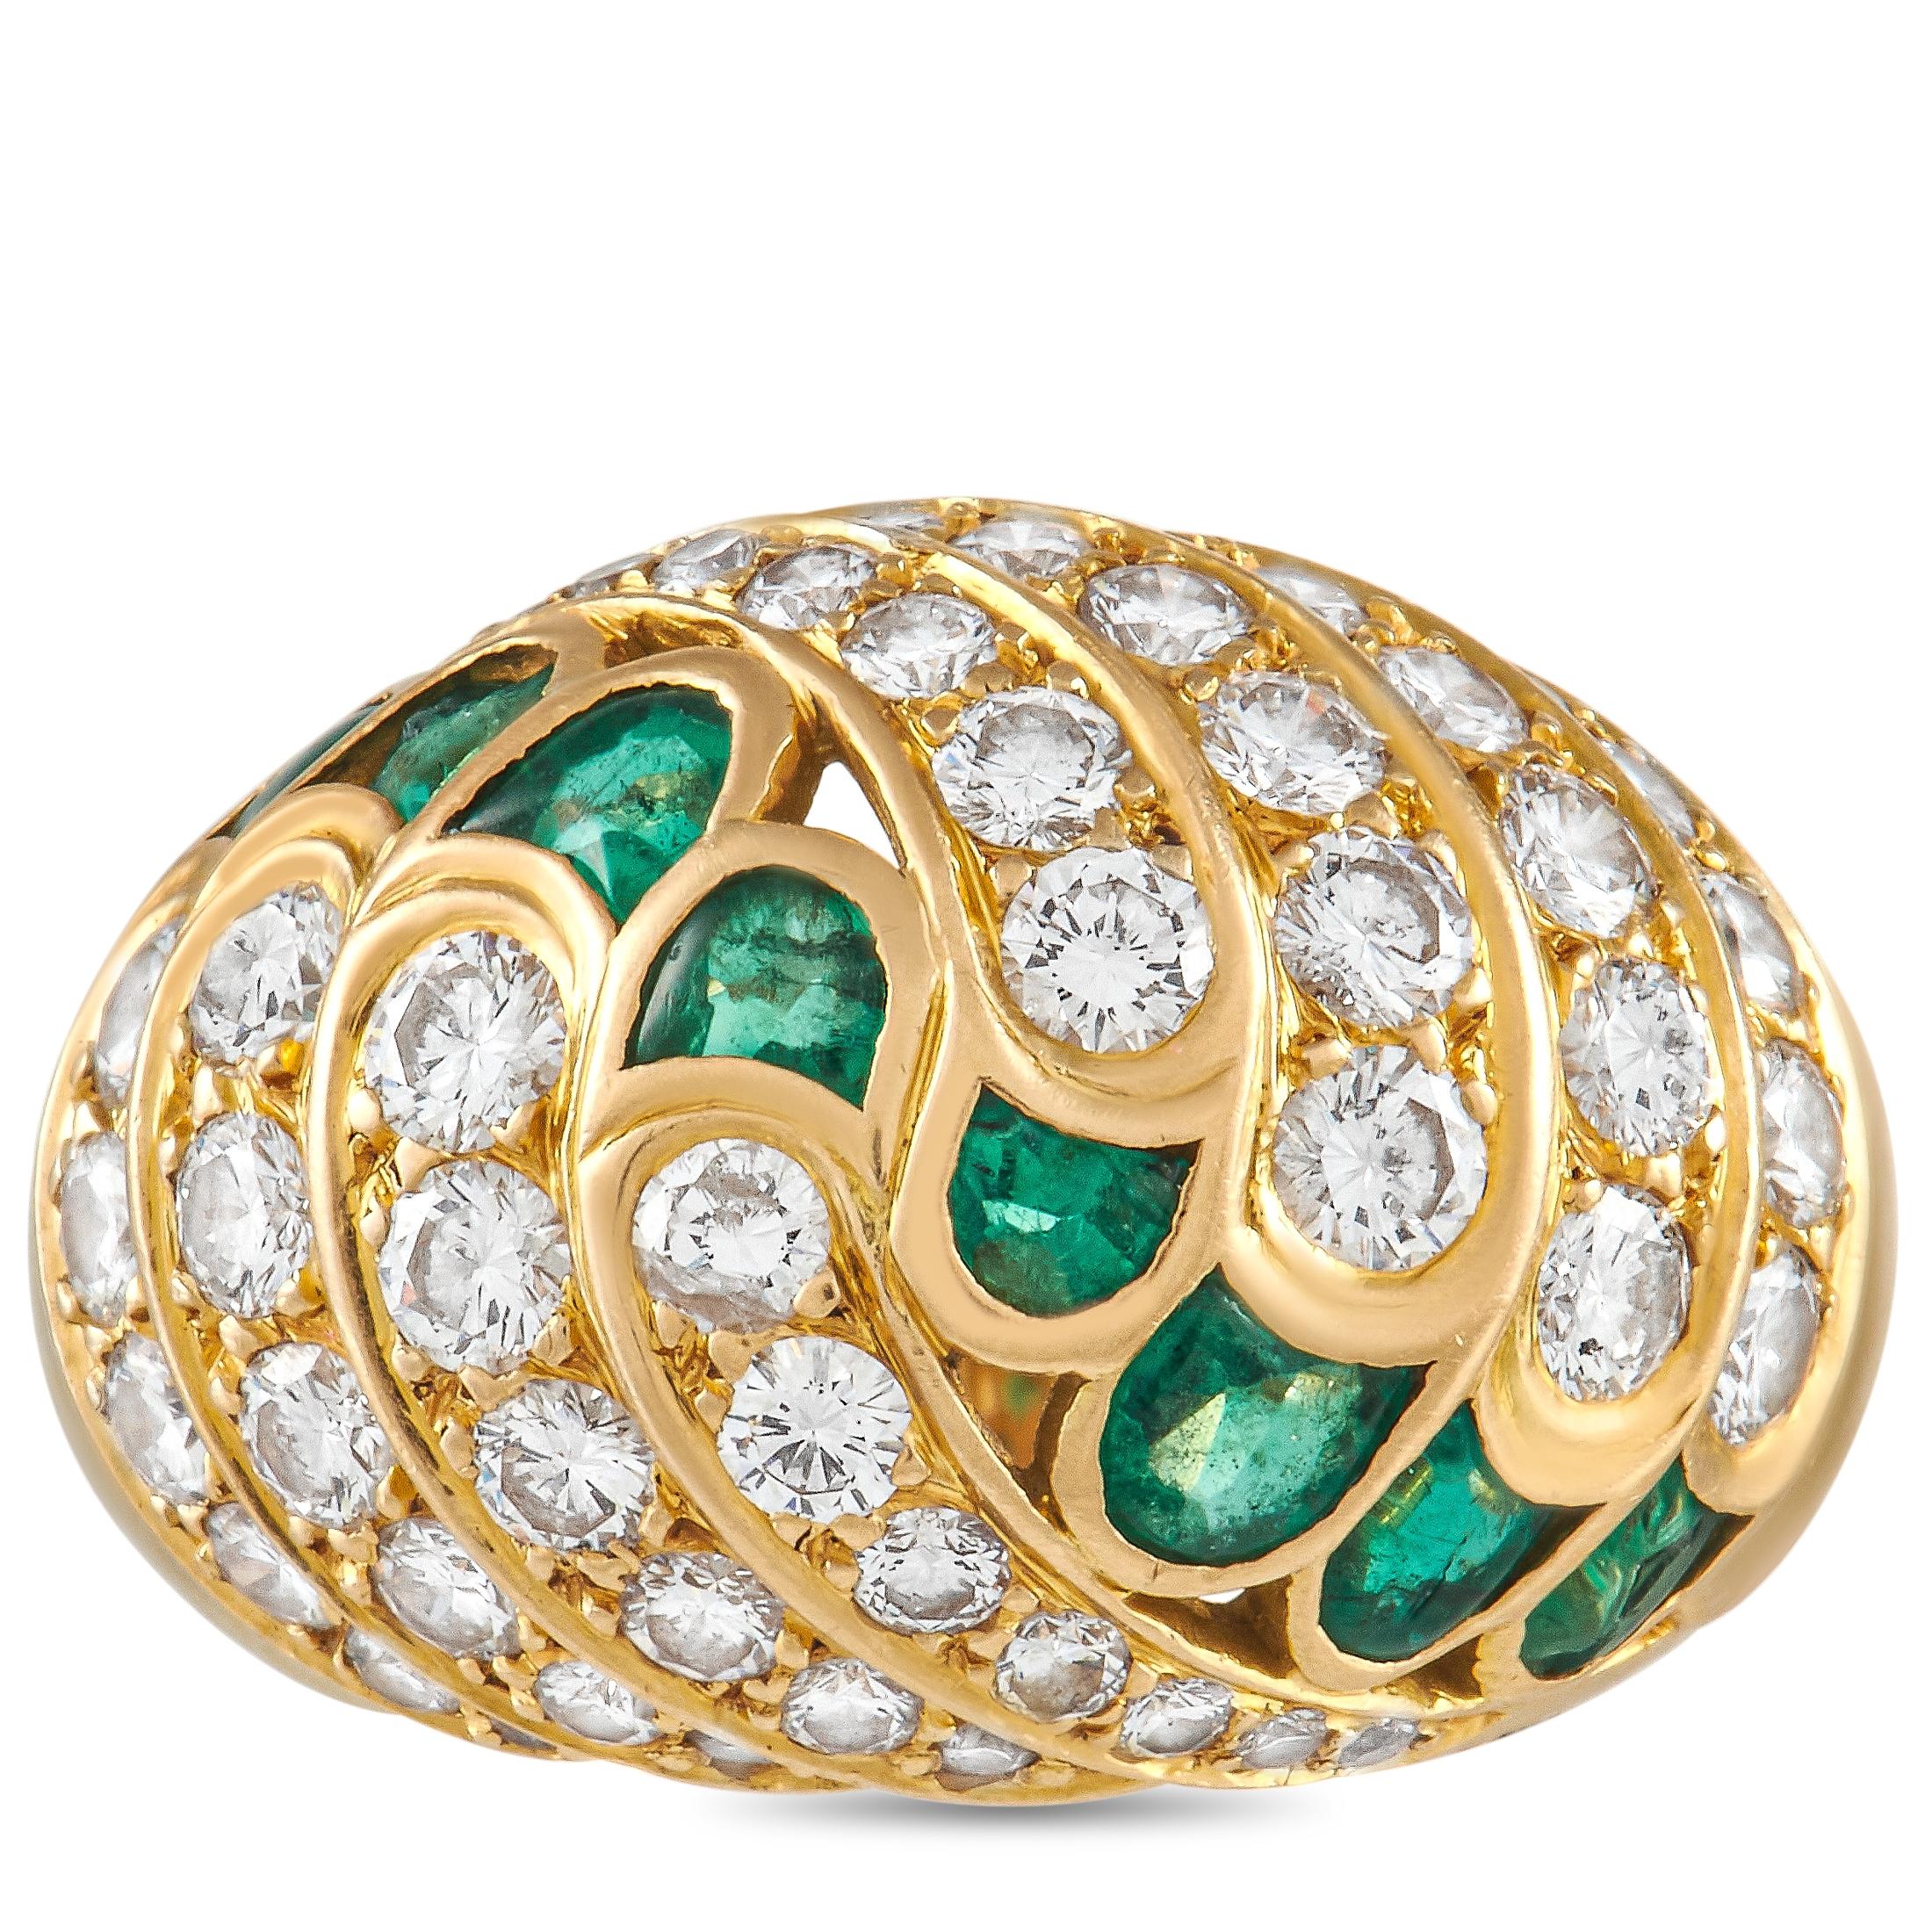 Round Cut Piaget 18K Yellow Gold 2.25 Ct Diamond and Emerald Ring For Sale